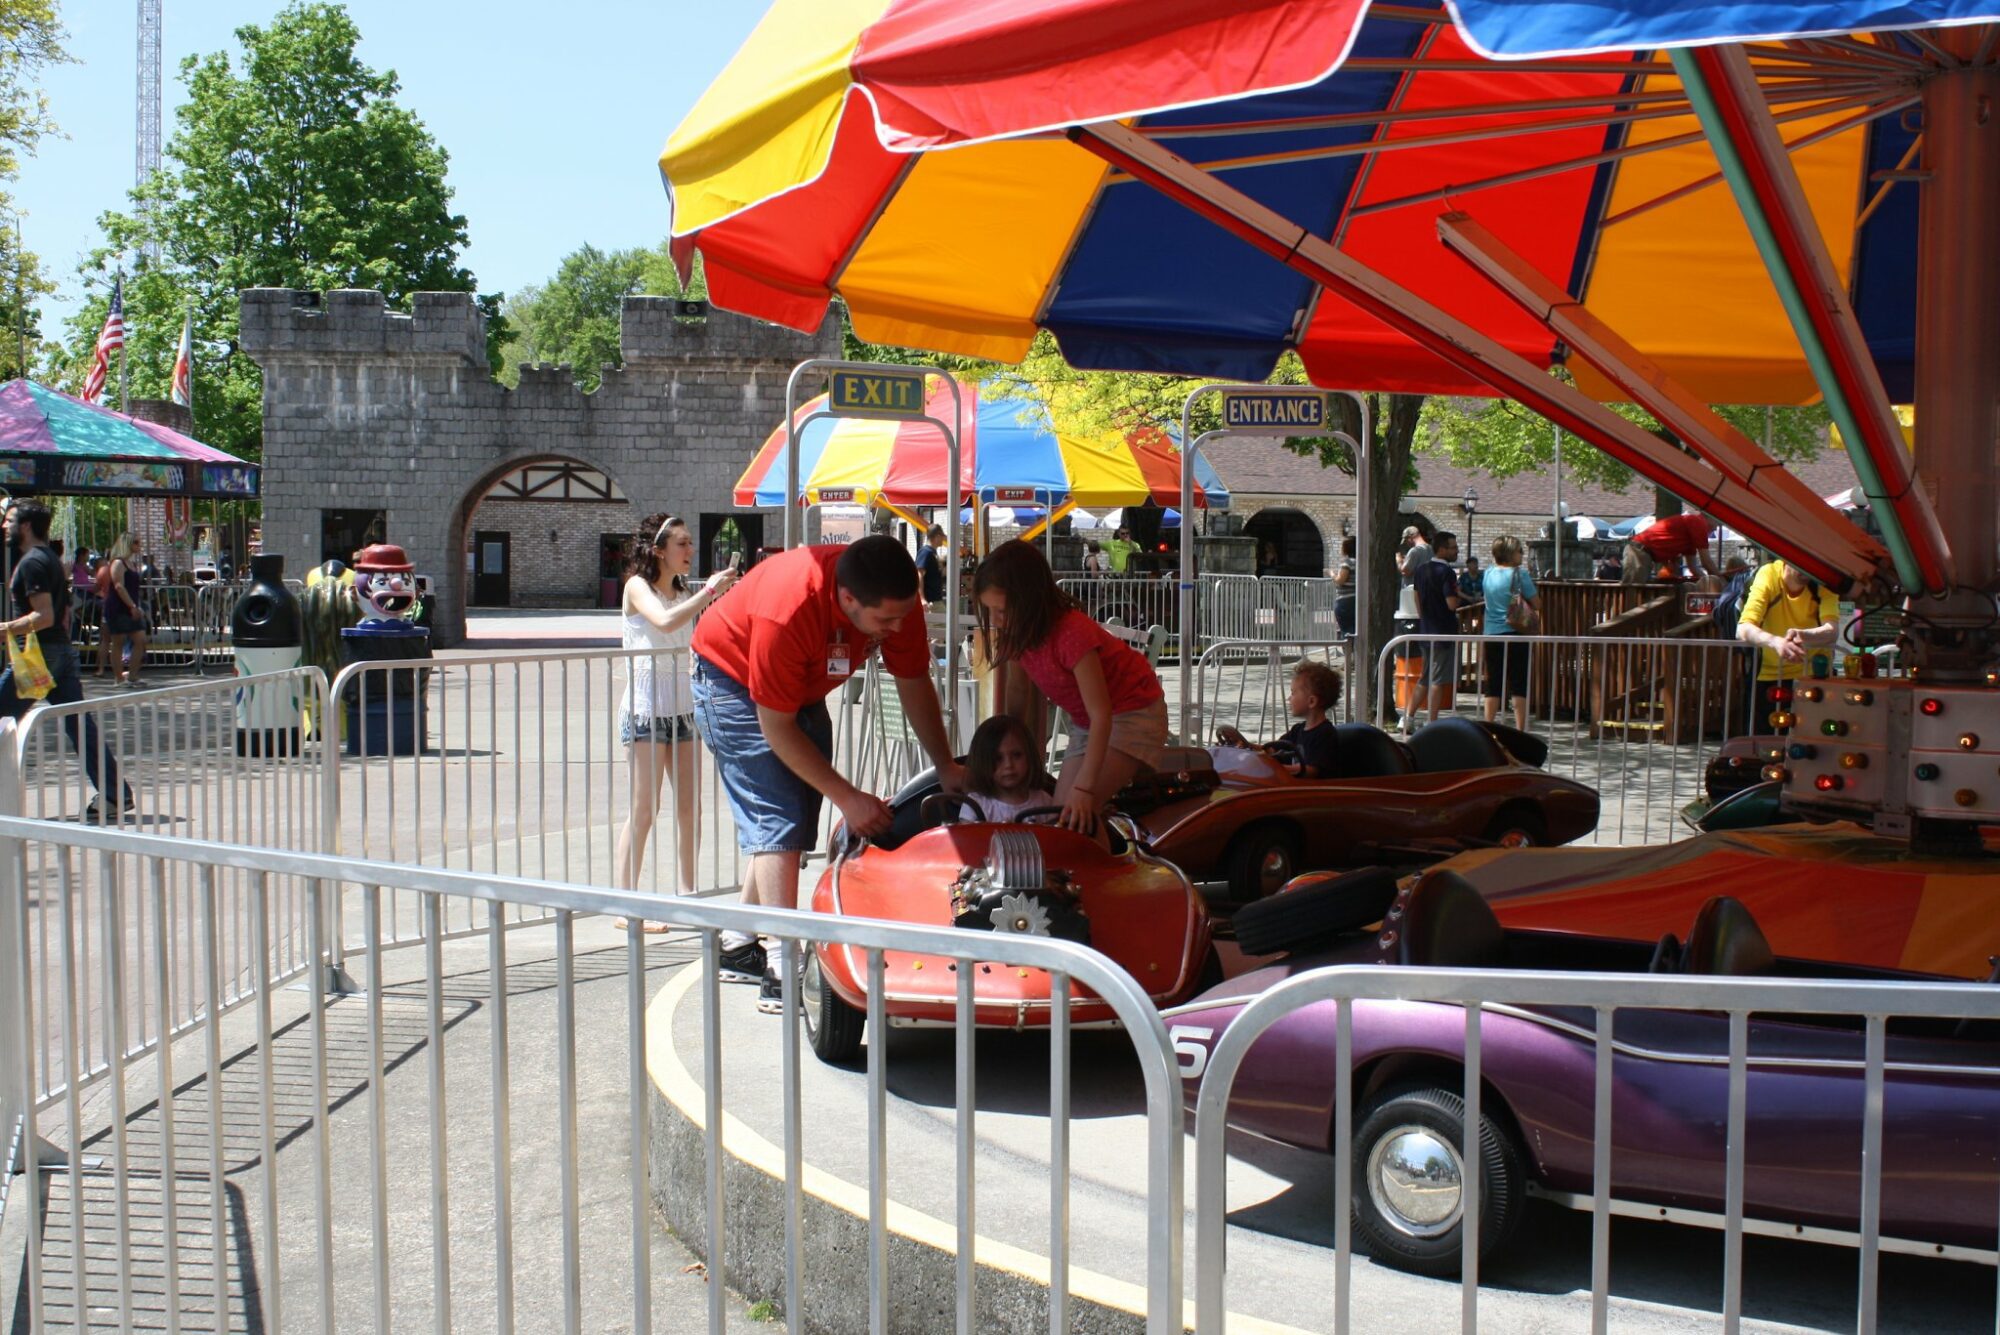 friendly staff members at DelGrosso's helping to buckle in a child on a ride